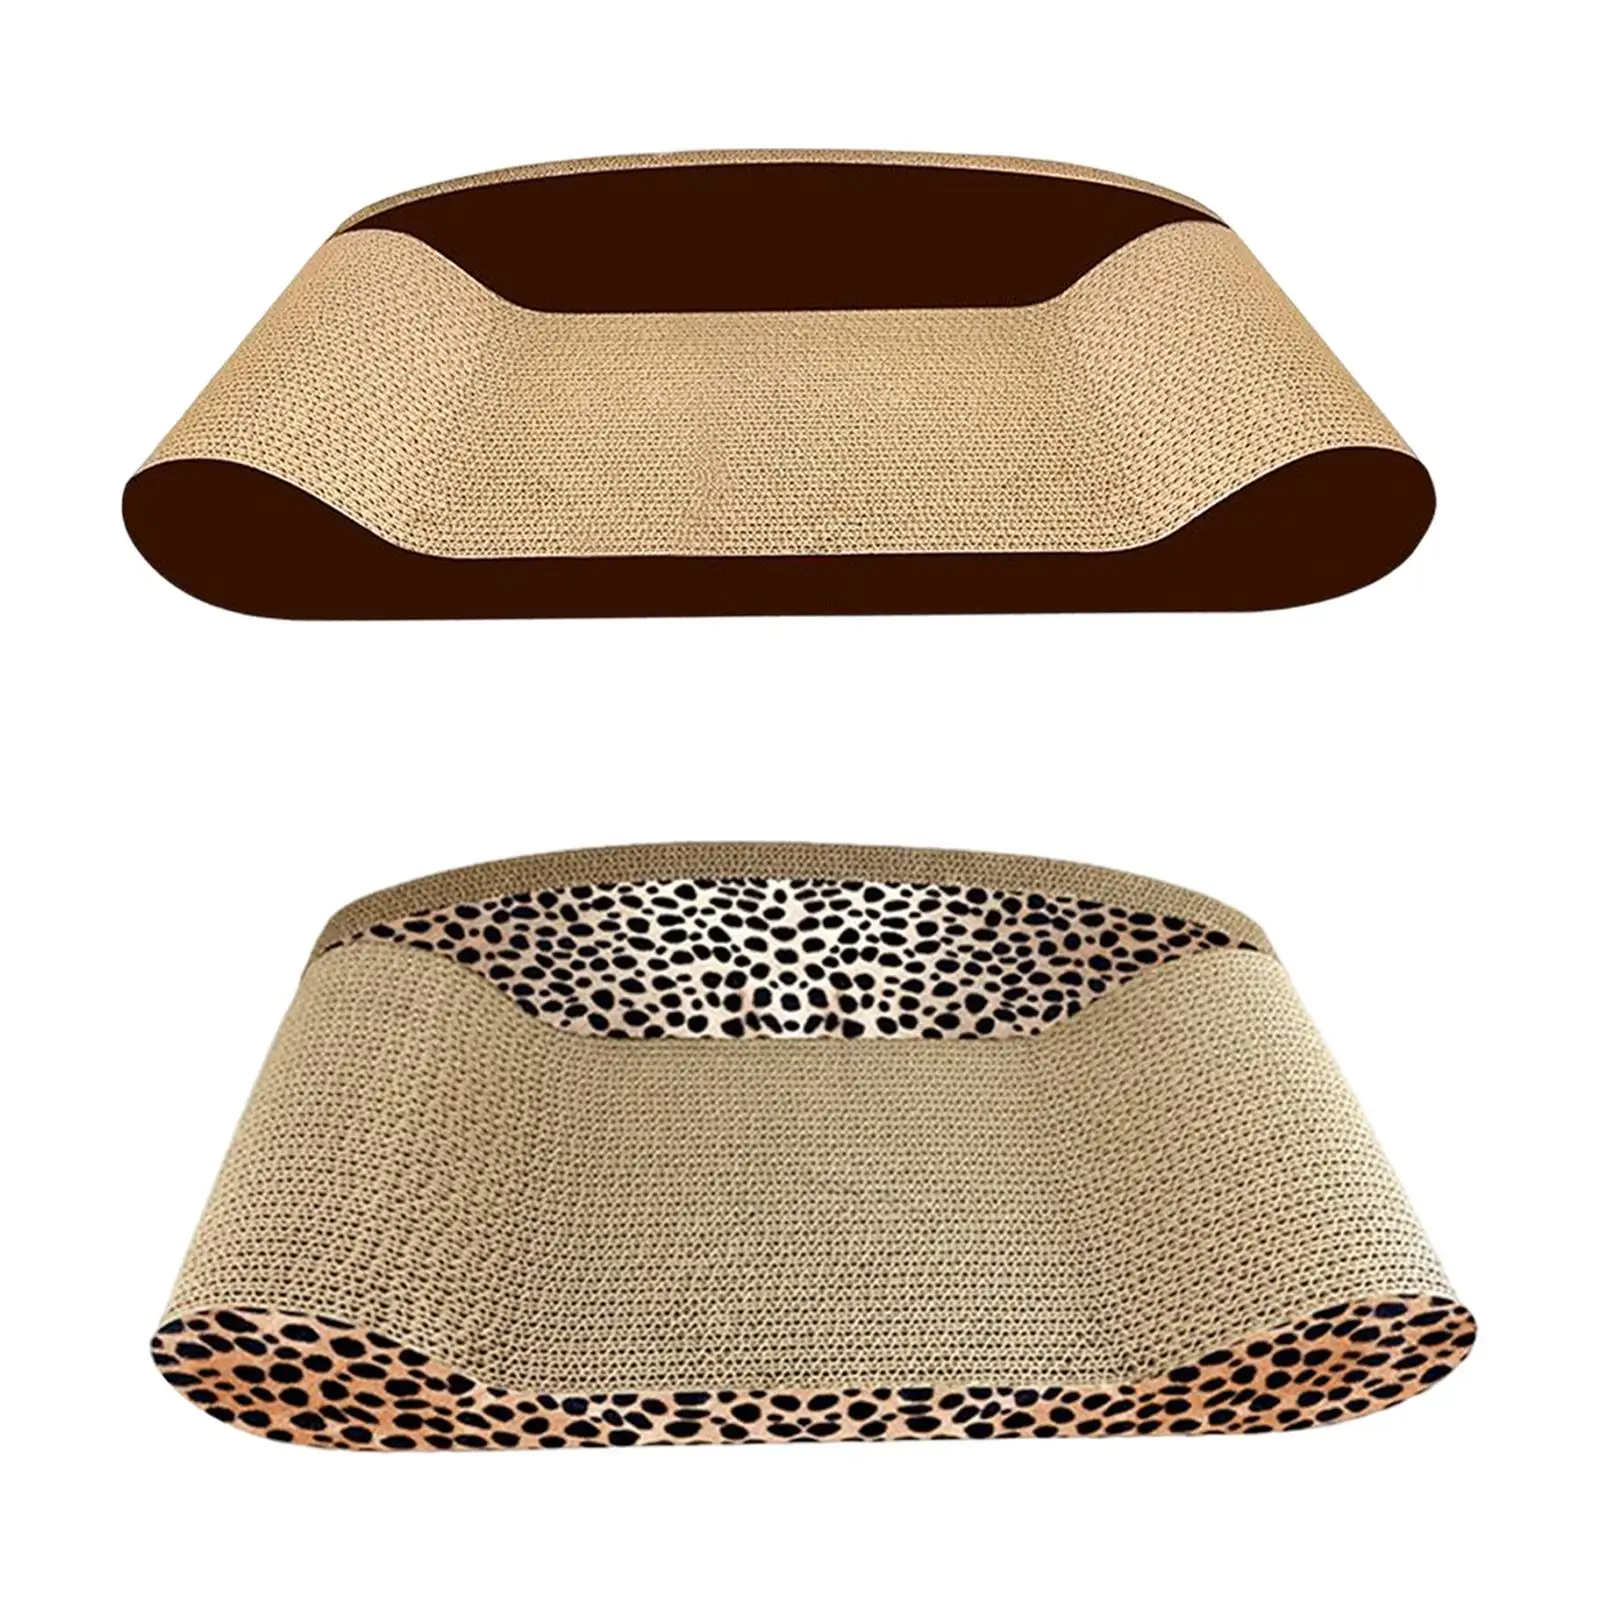 Pet Cat Scratcher Sofa Scratching Board Toy Sleeping Bed Grind Claws Cushion for Kitty Furniture Protector Pet Accessories